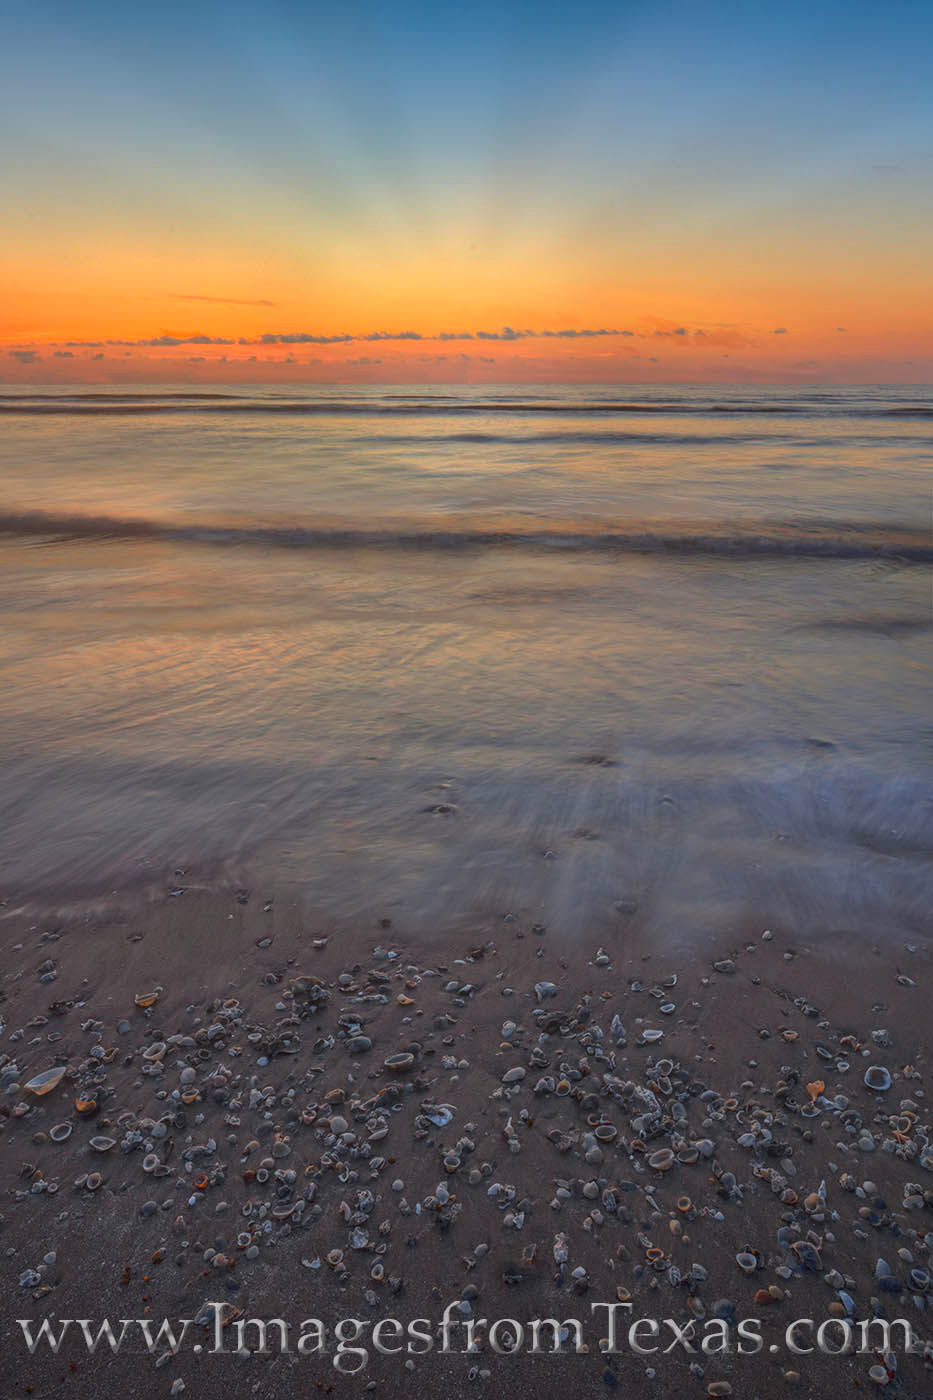 Seashells at sunrise during a low tide make for some fun beach combing along the sands at South Padre Island.